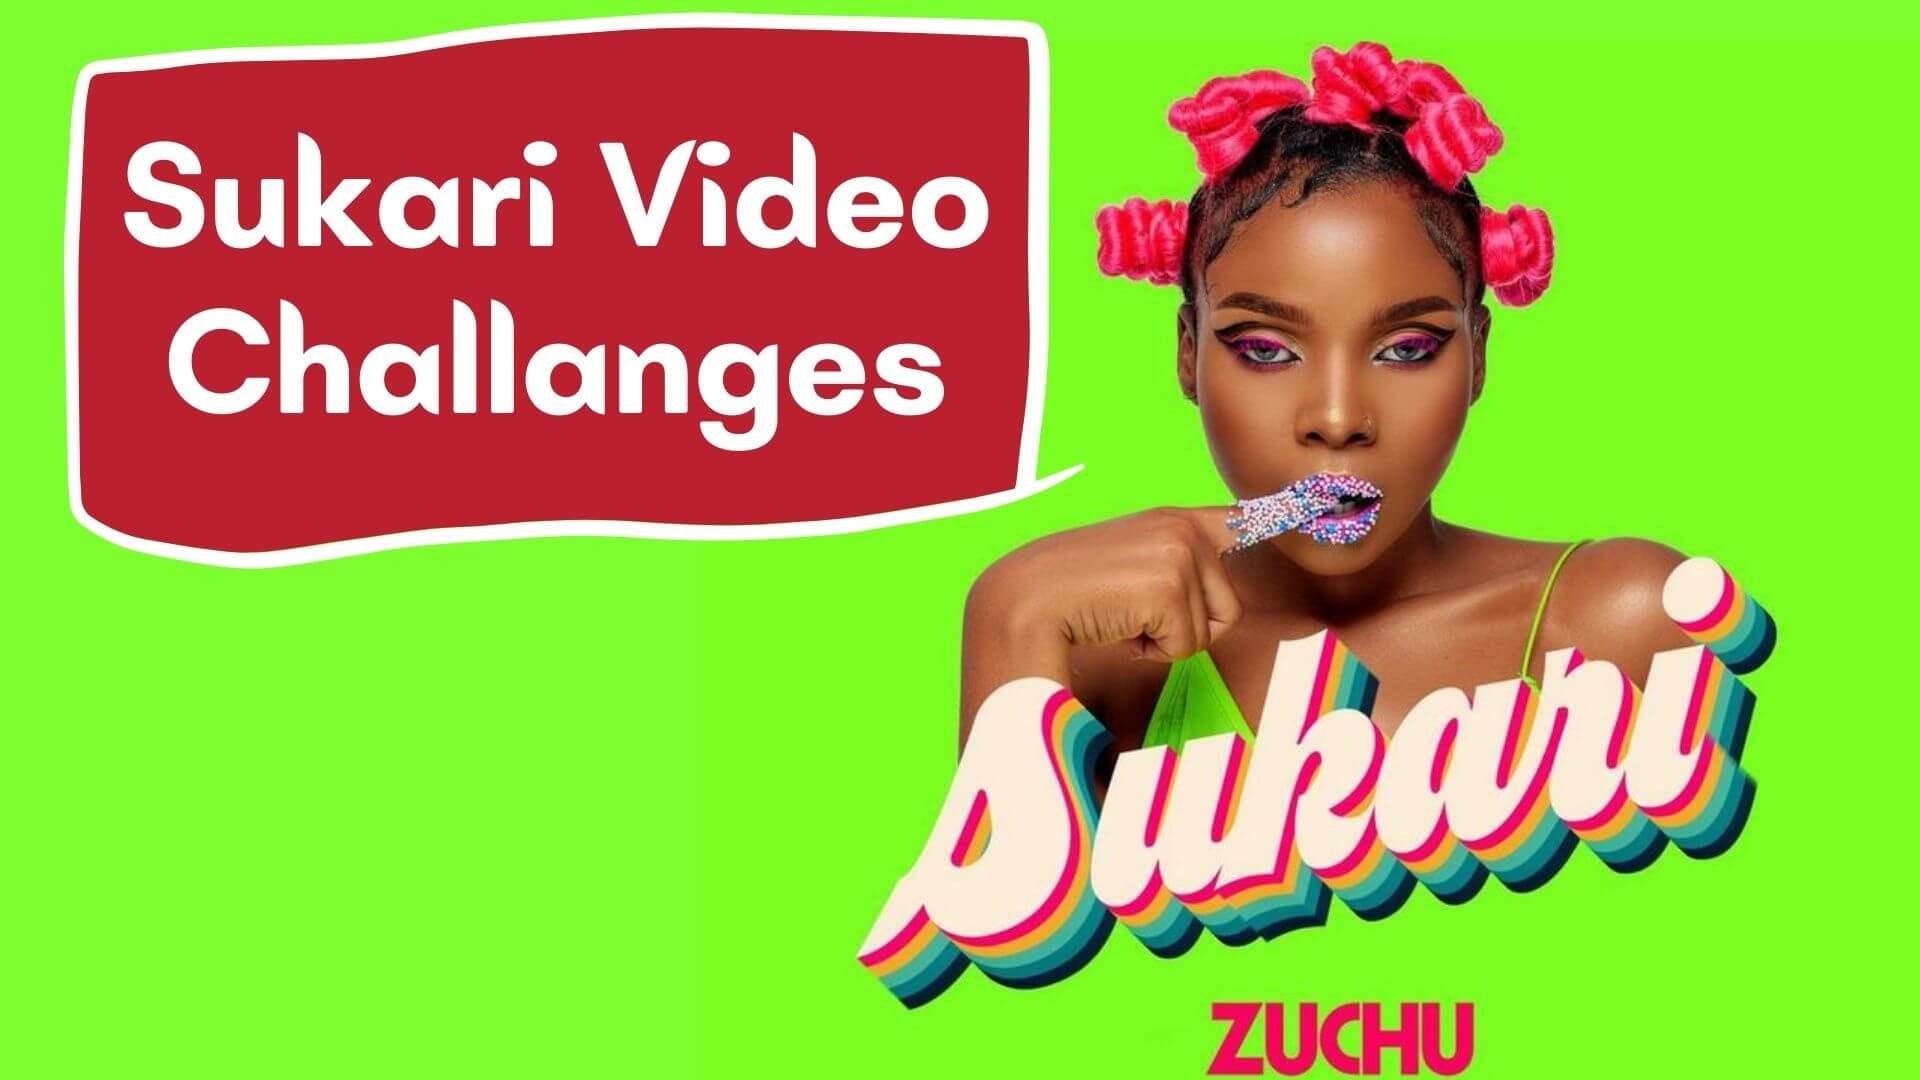 Sukari by Zuchu song video challanges compilations